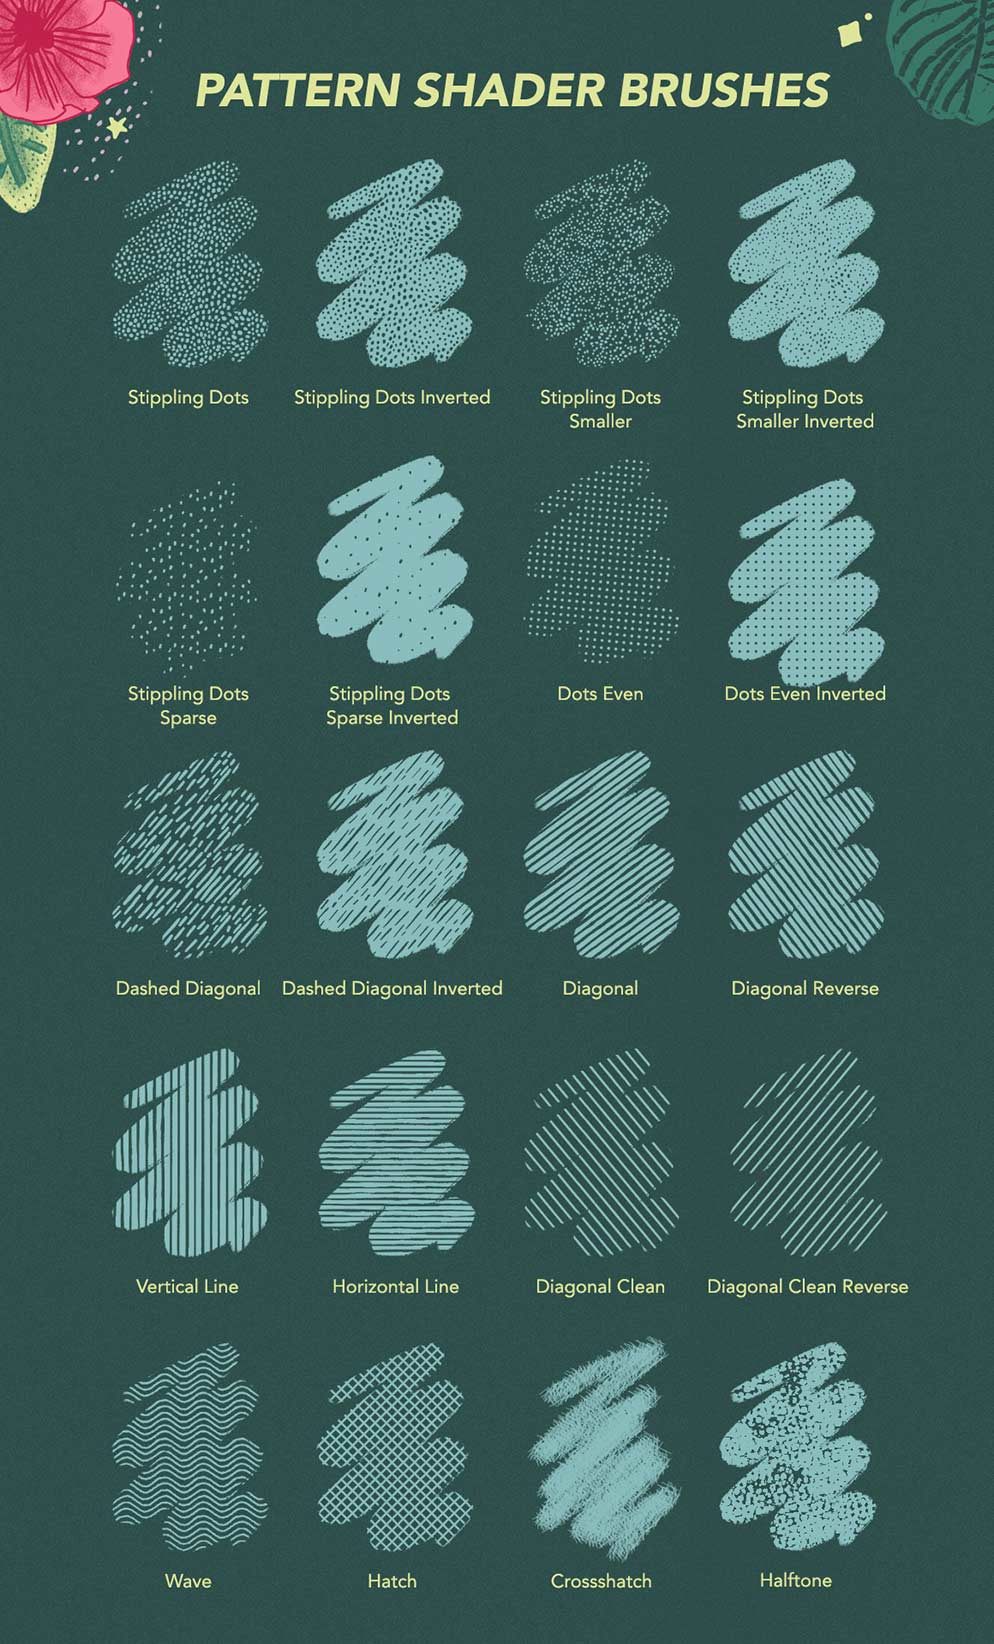 Texture Toolkit Brushes for Procreate - Pattern Shader Brushes